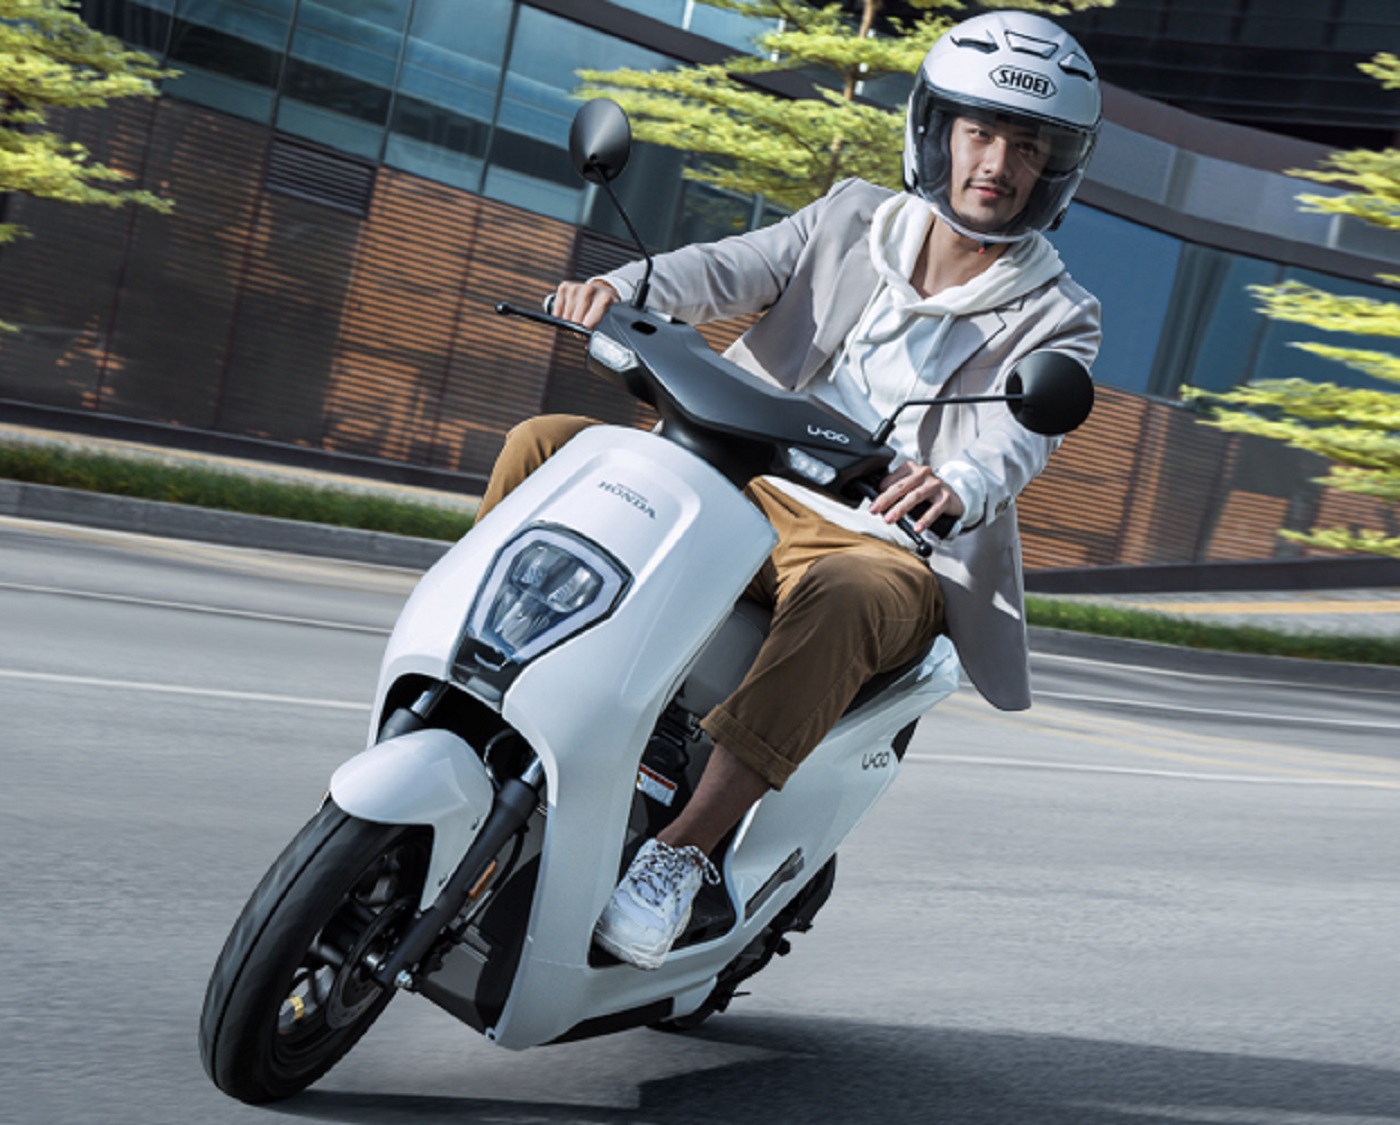  Honda  U GO E  Scooter  Launched With 133 KM Range